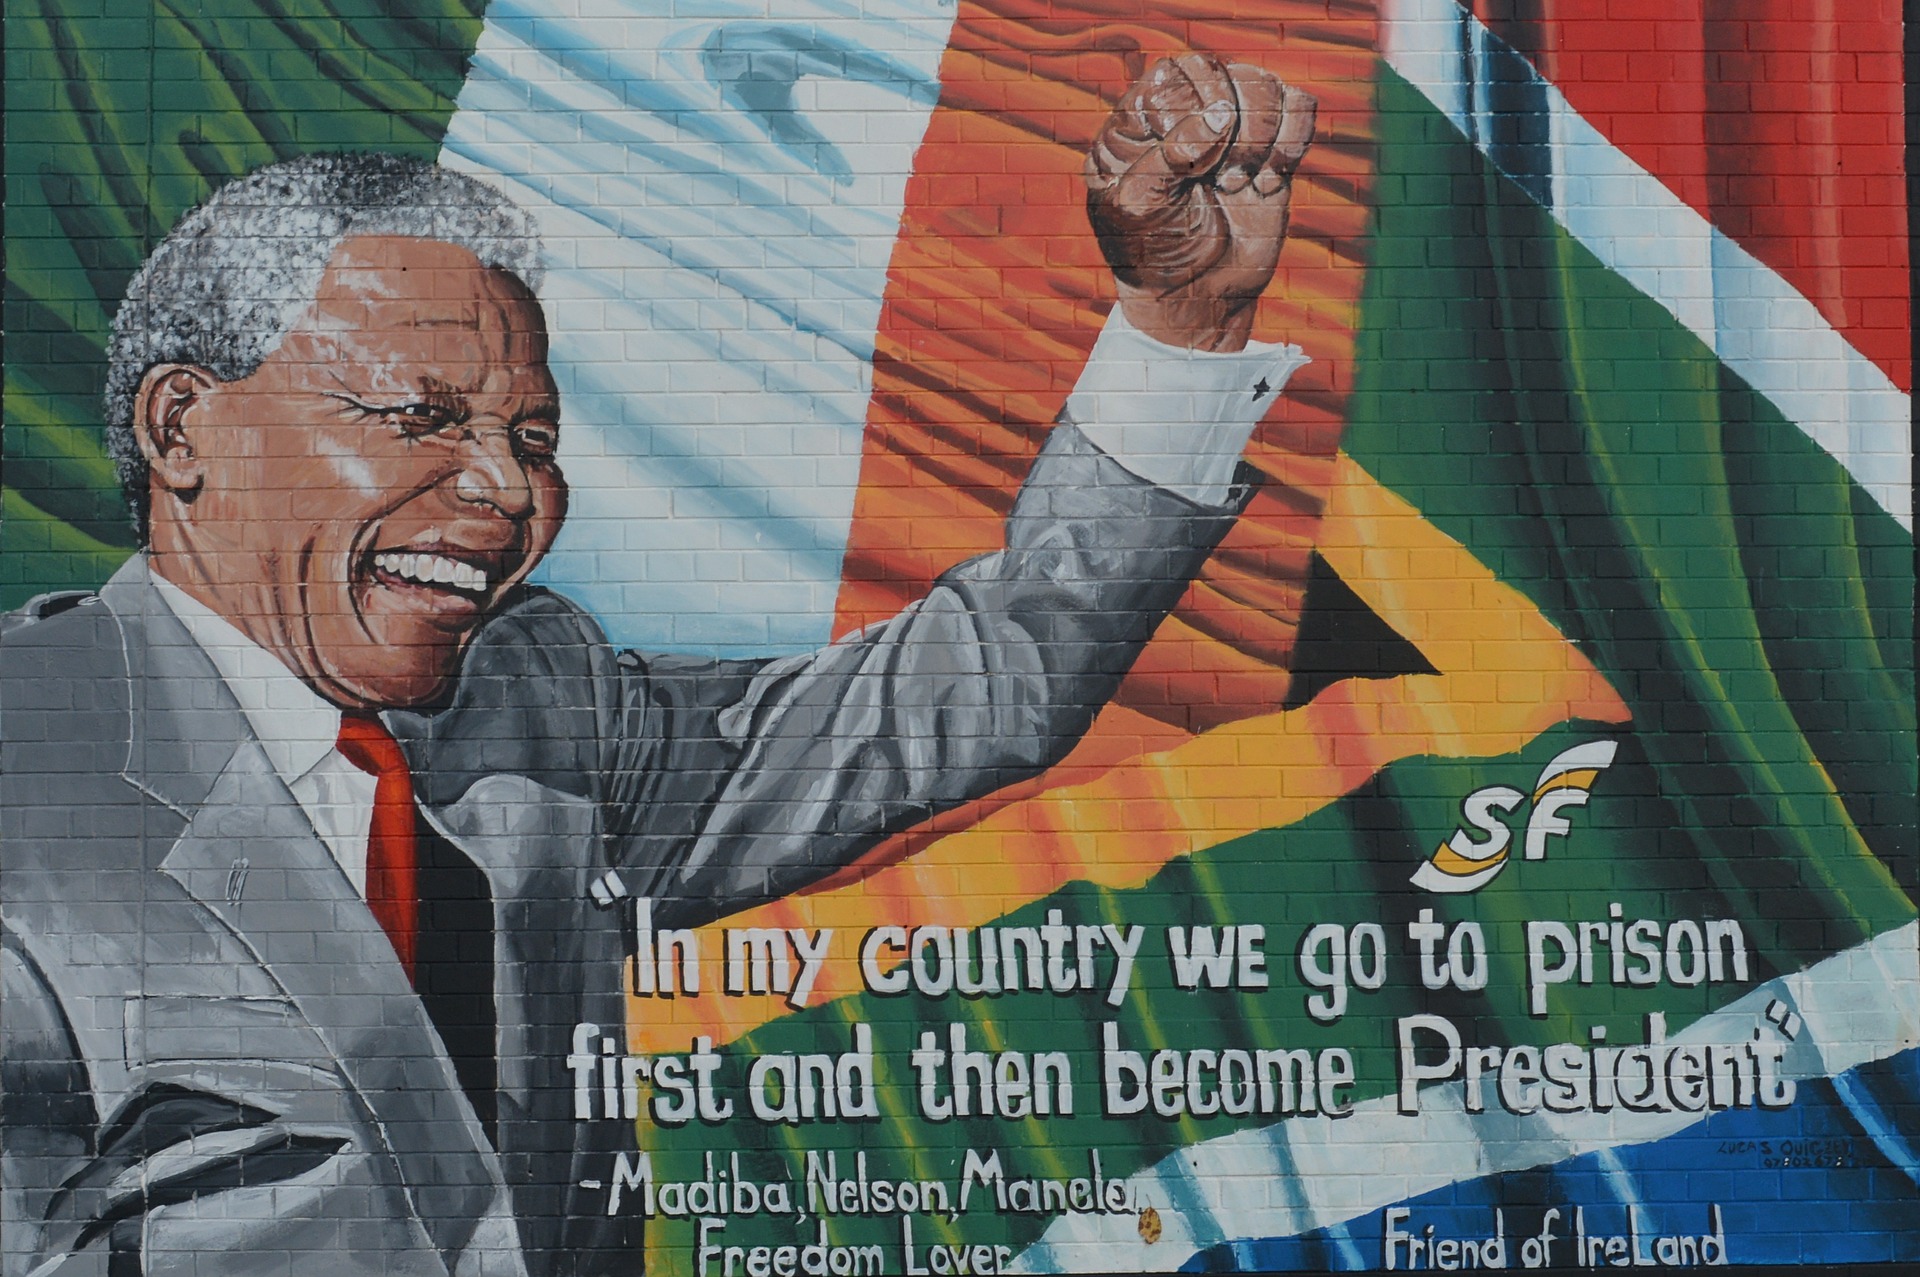 Following the Footsteps of Nelson Mandela